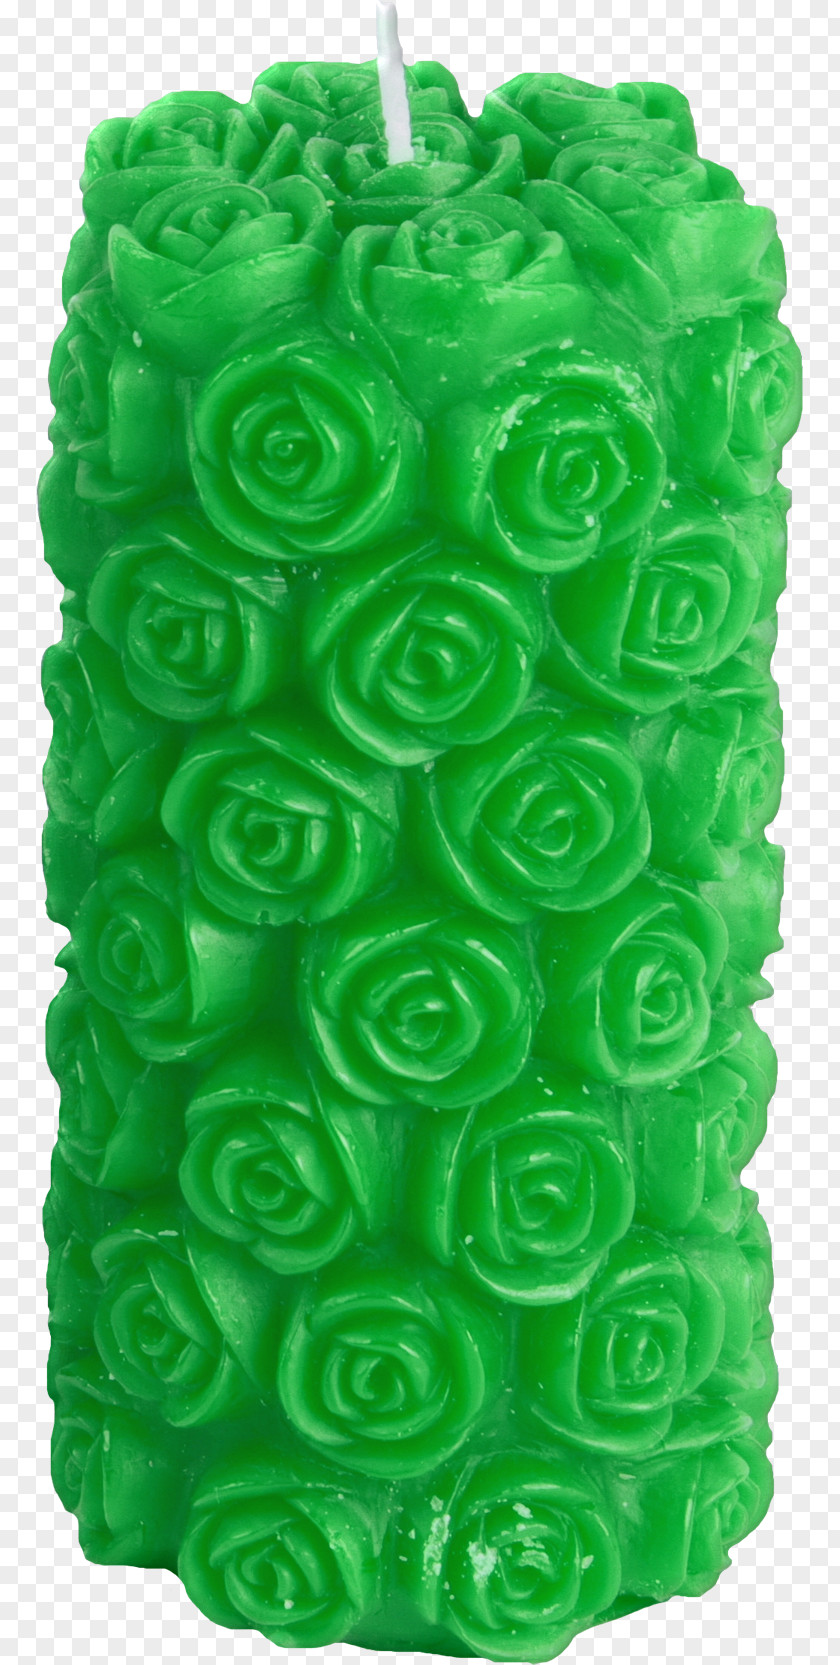 Green Rose Candle Material Free To Pull Ubon Ratchathani Festival Beach PNG